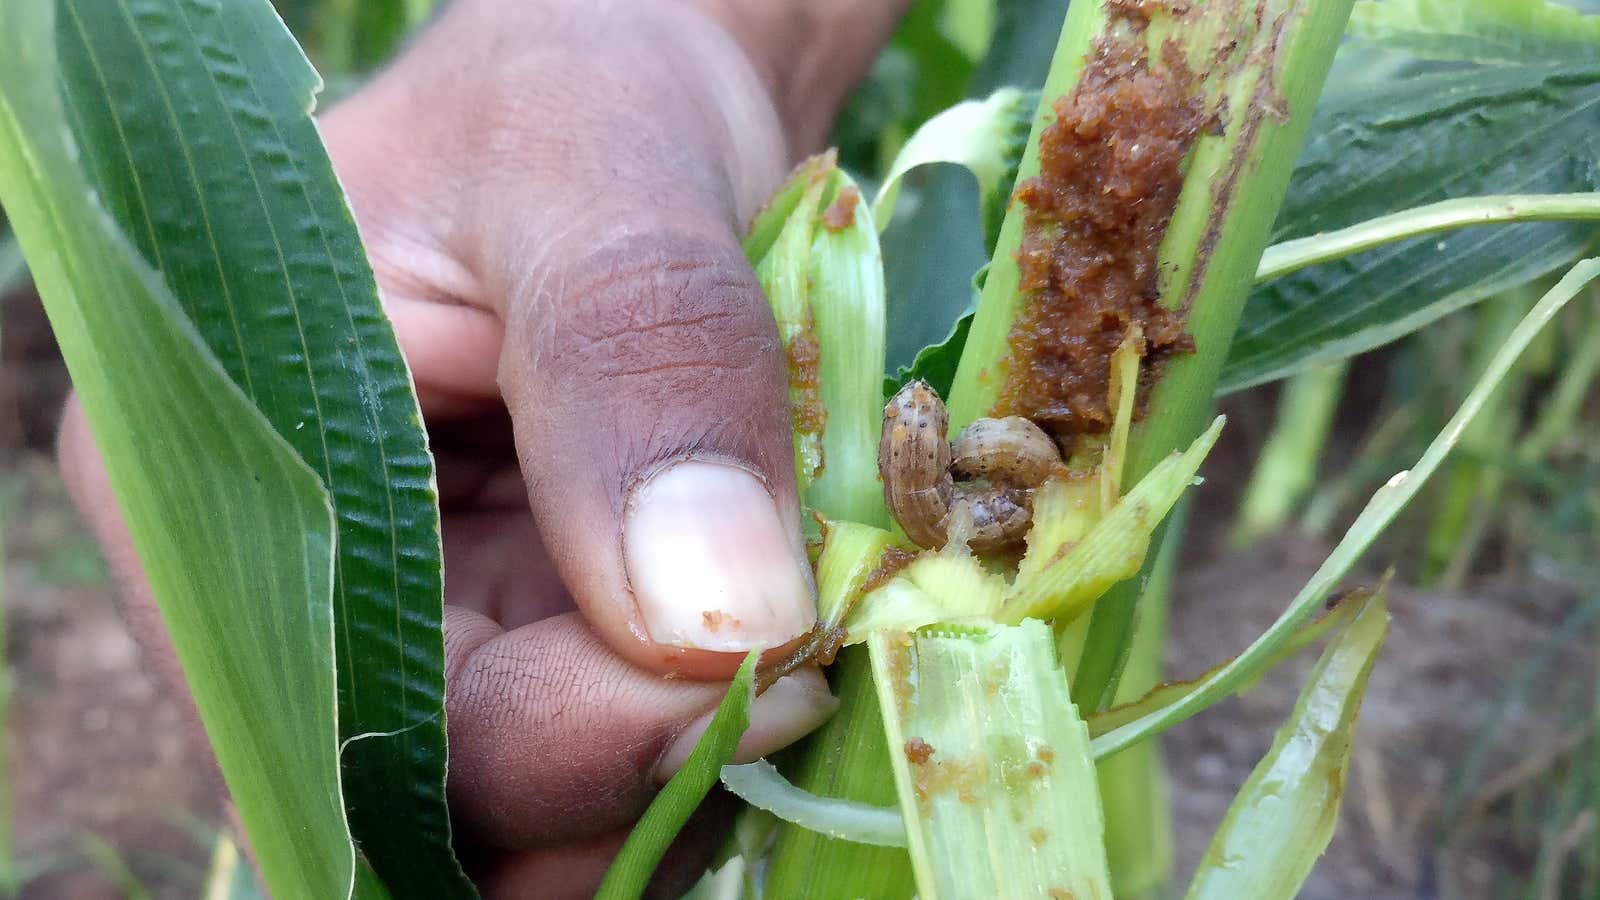 A farmer in India shows an armyworm-infested corn shoot.